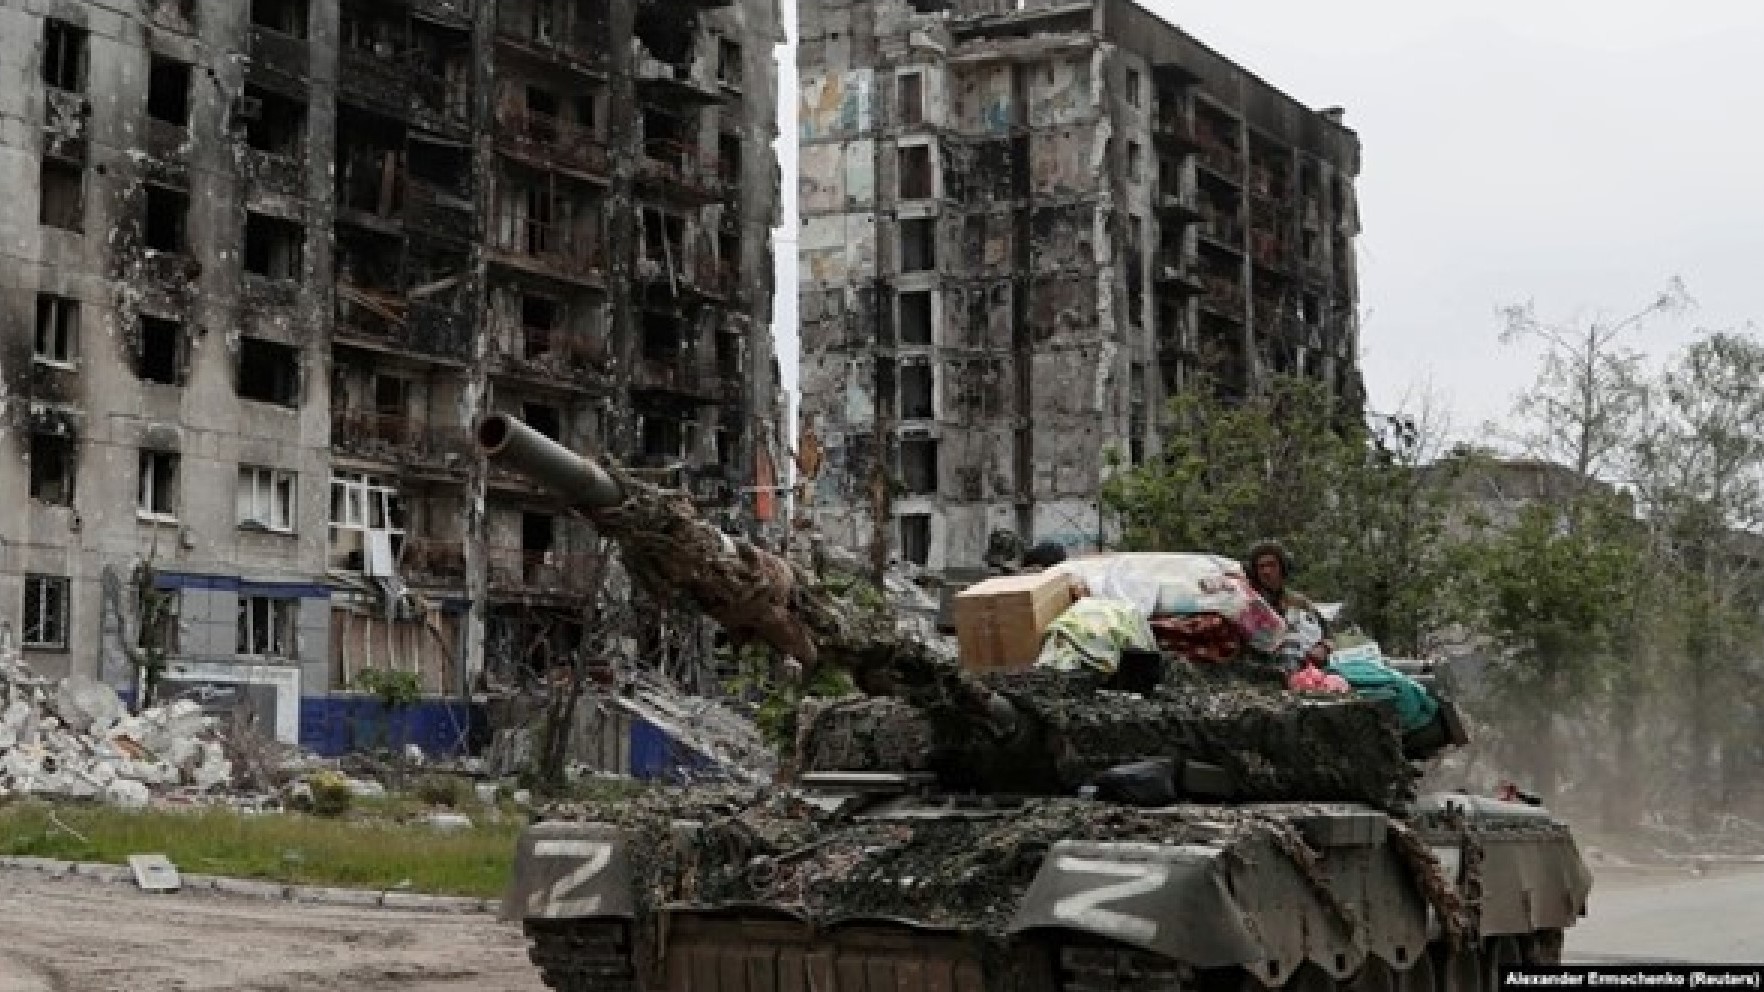 Popasna 26 May 2022. Russia has already stated it seems ’no point’ in rebuilding this city that it mercilessly destroyed Photo Alekxander Ermochenko for Reuters